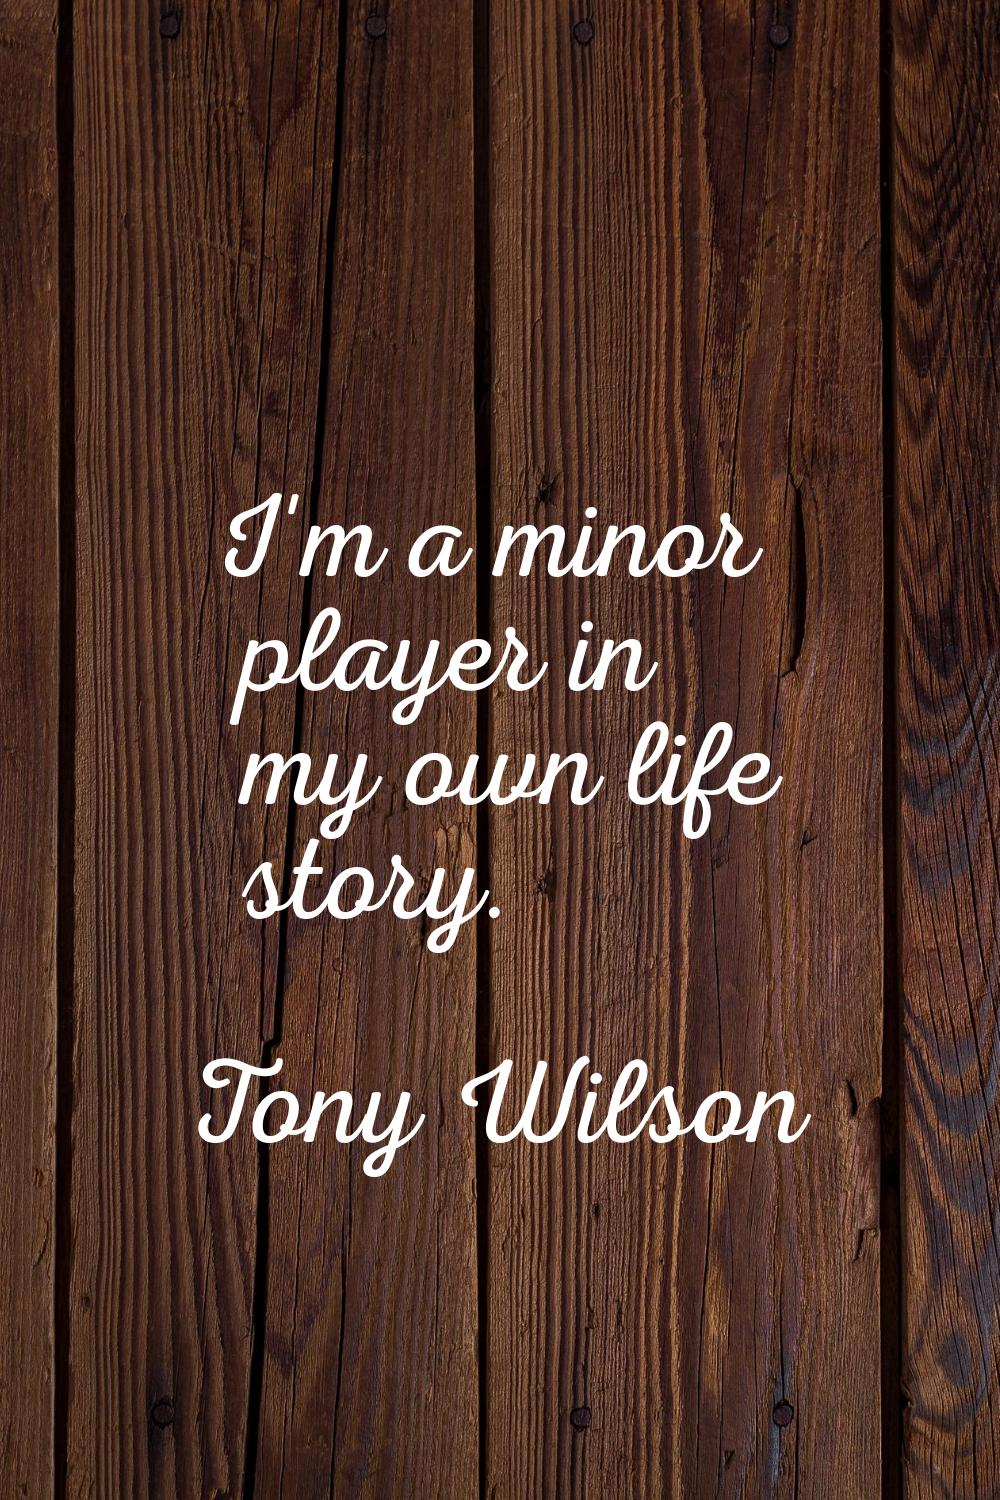 I'm a minor player in my own life story.